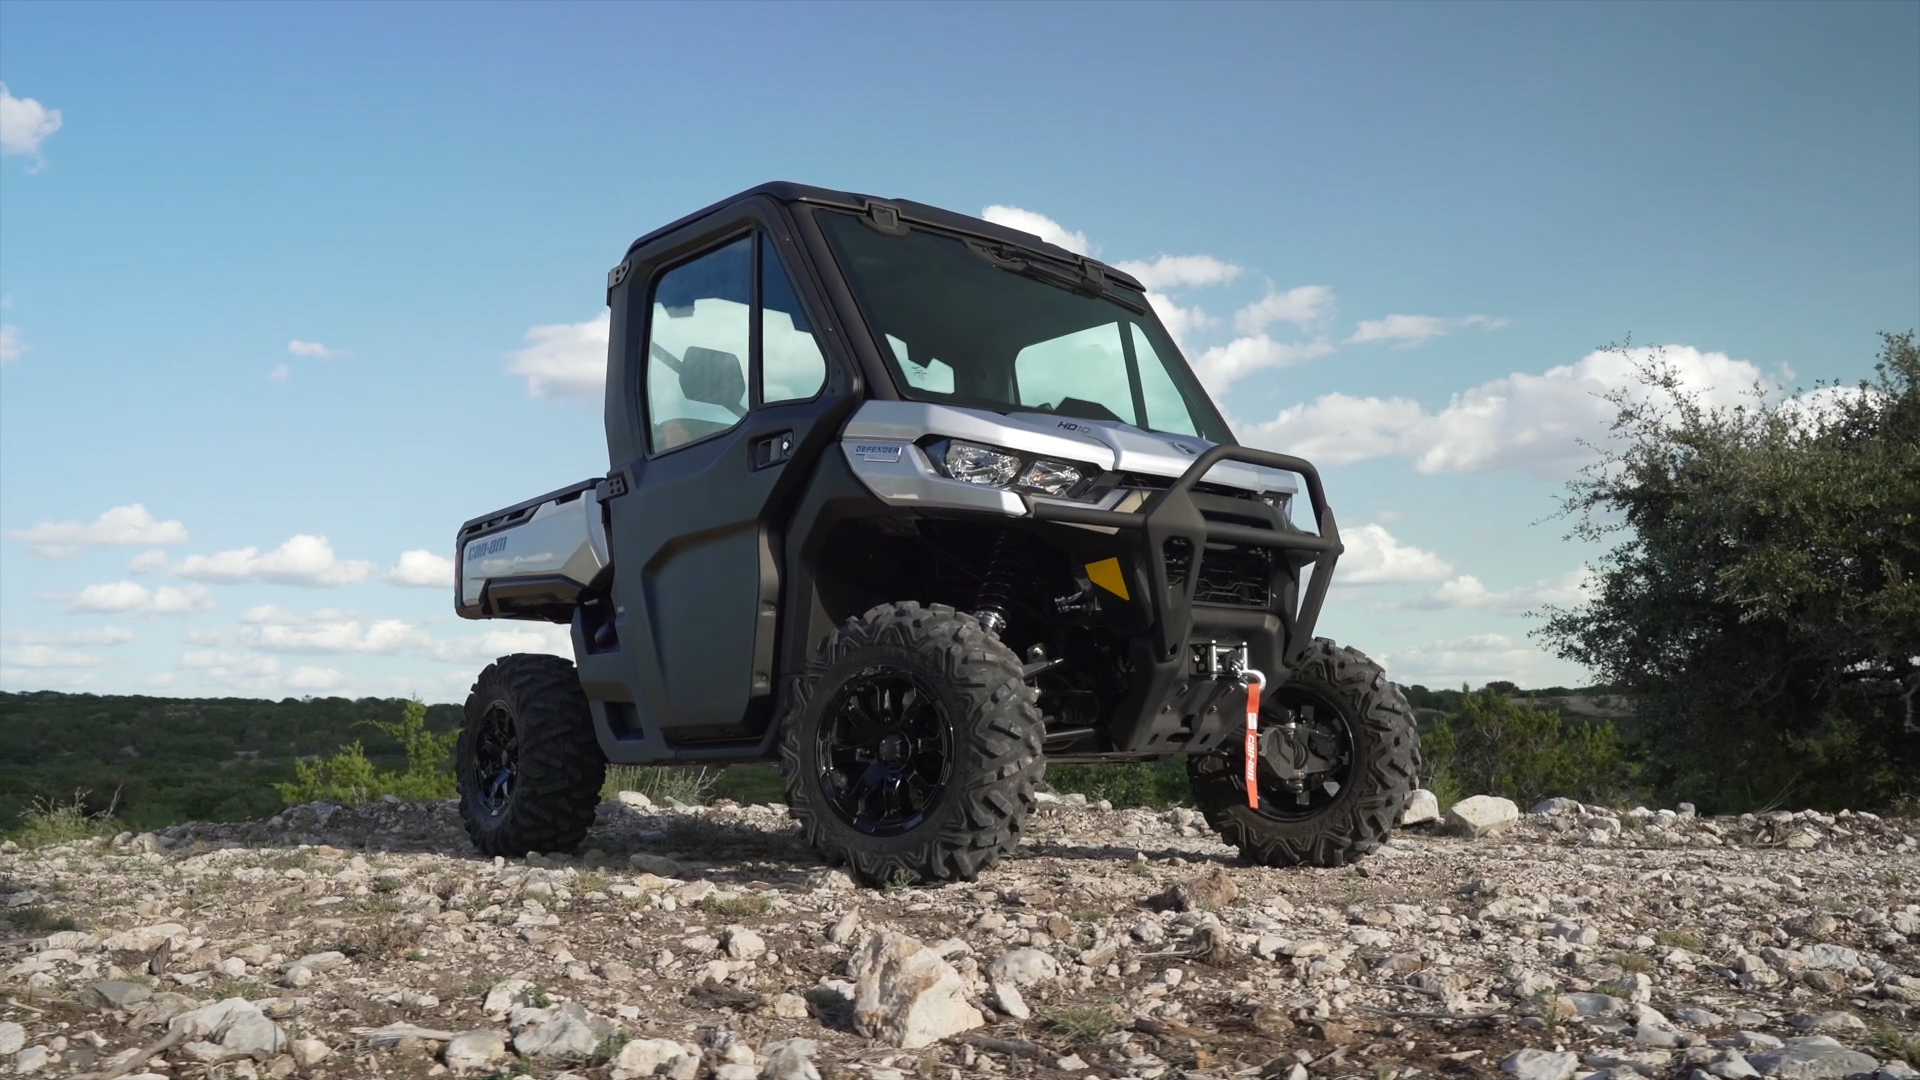 2020 Can-Am Defender Limited Test: WITH VIDEO.